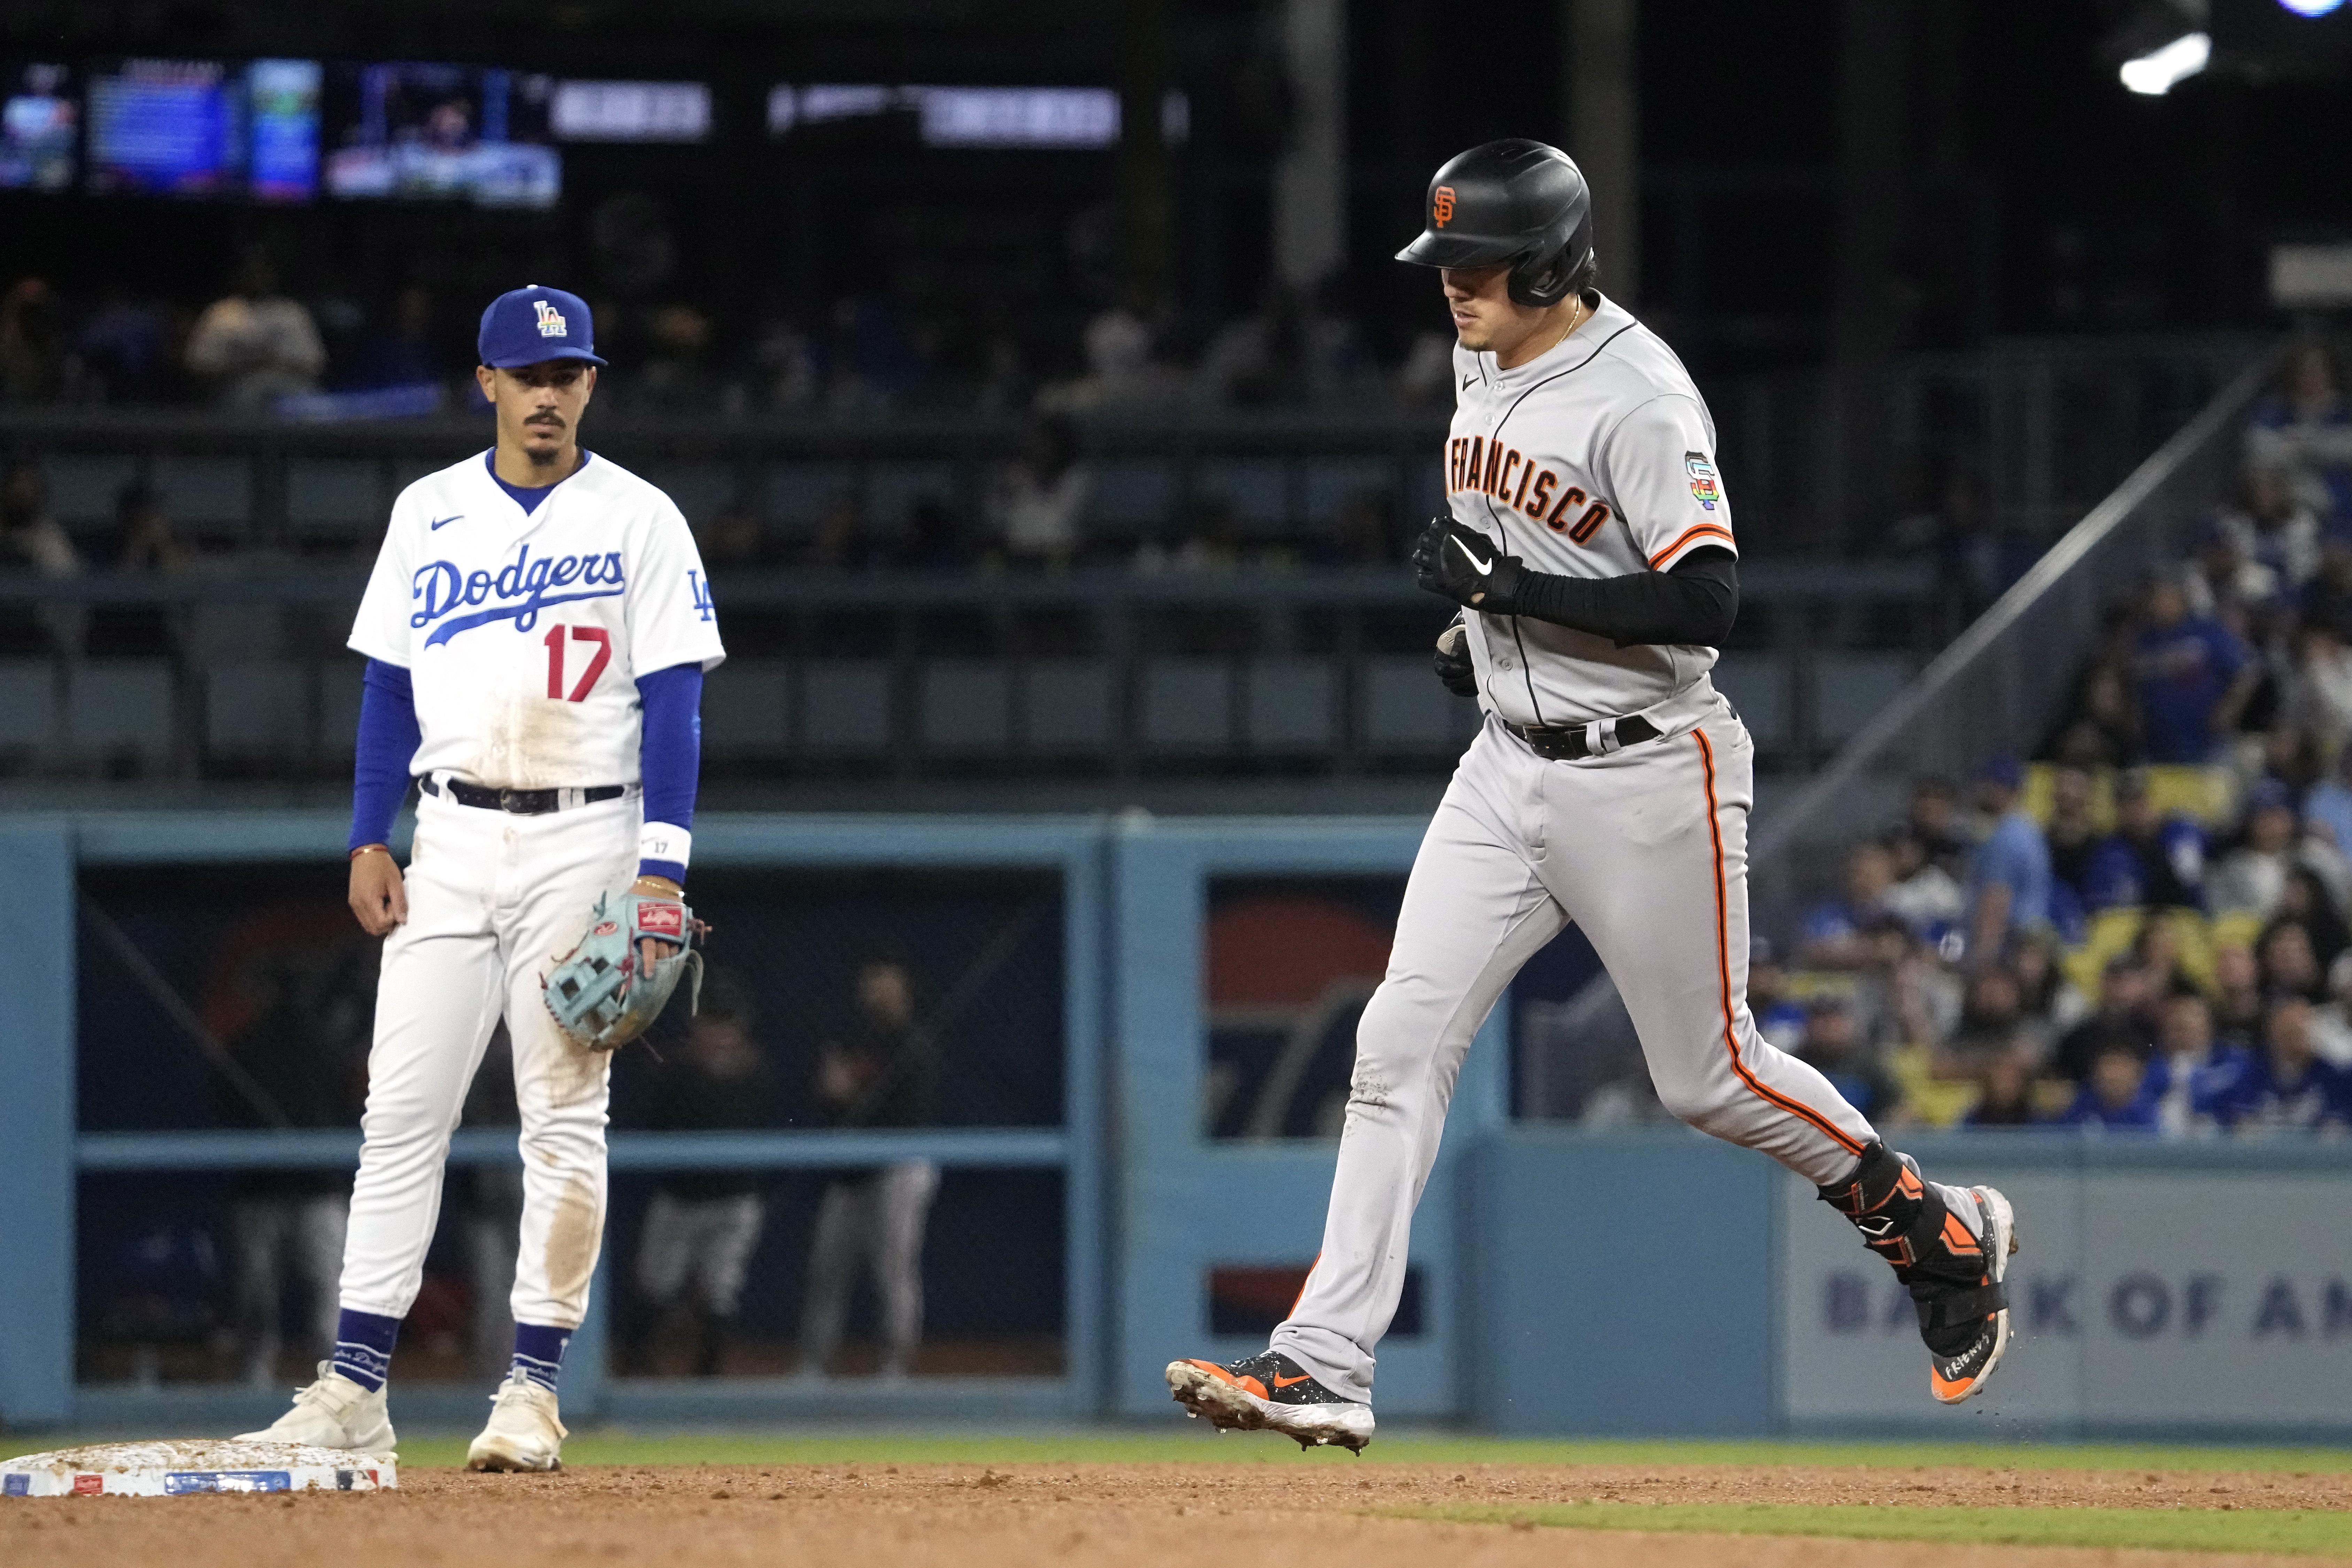 Dodgers drop 2 games in a row to the Giants